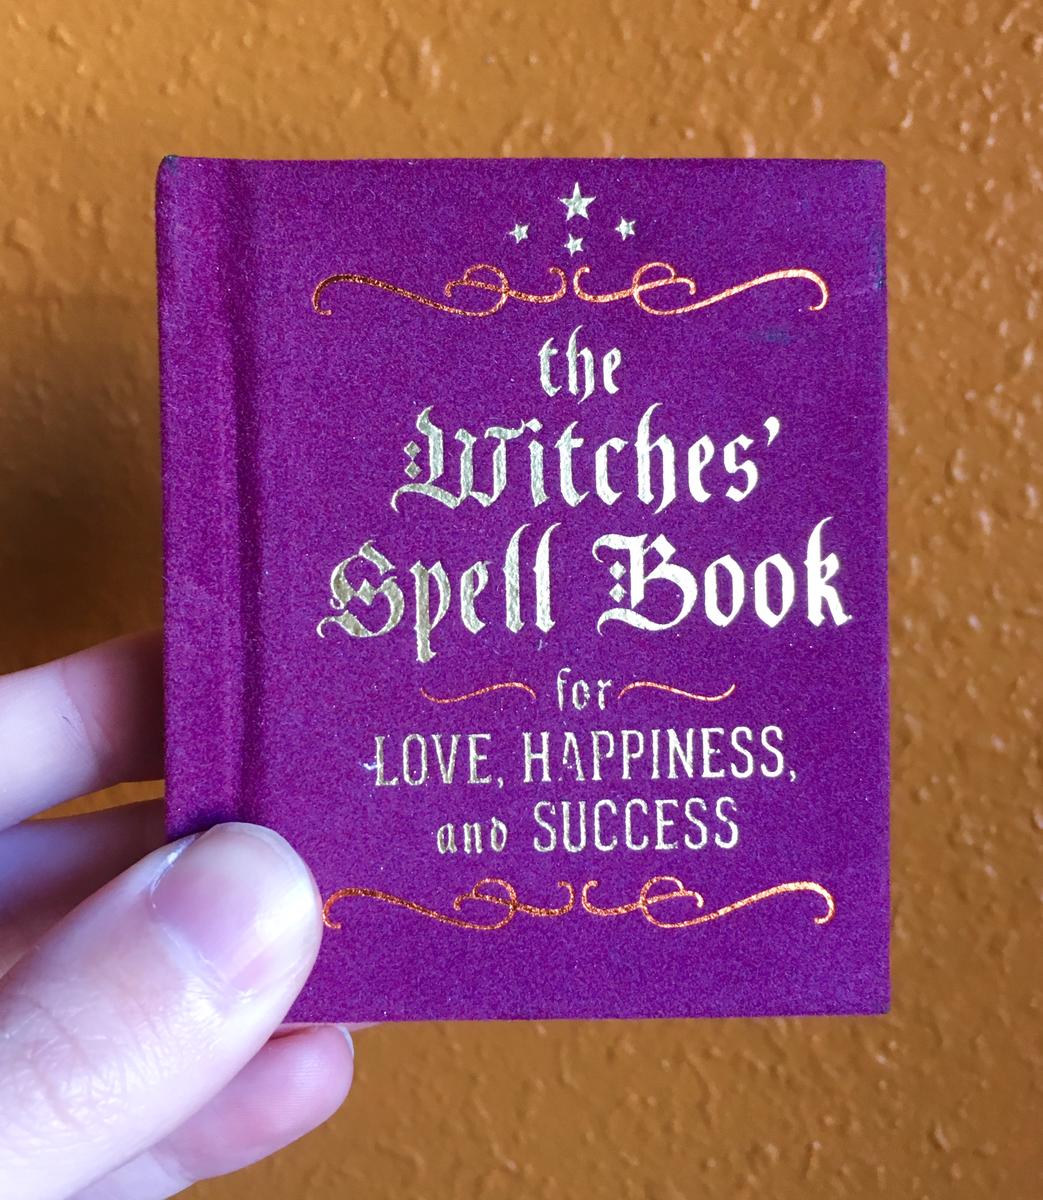 The Witches' Spell Book by Cerridwen Greenleaf